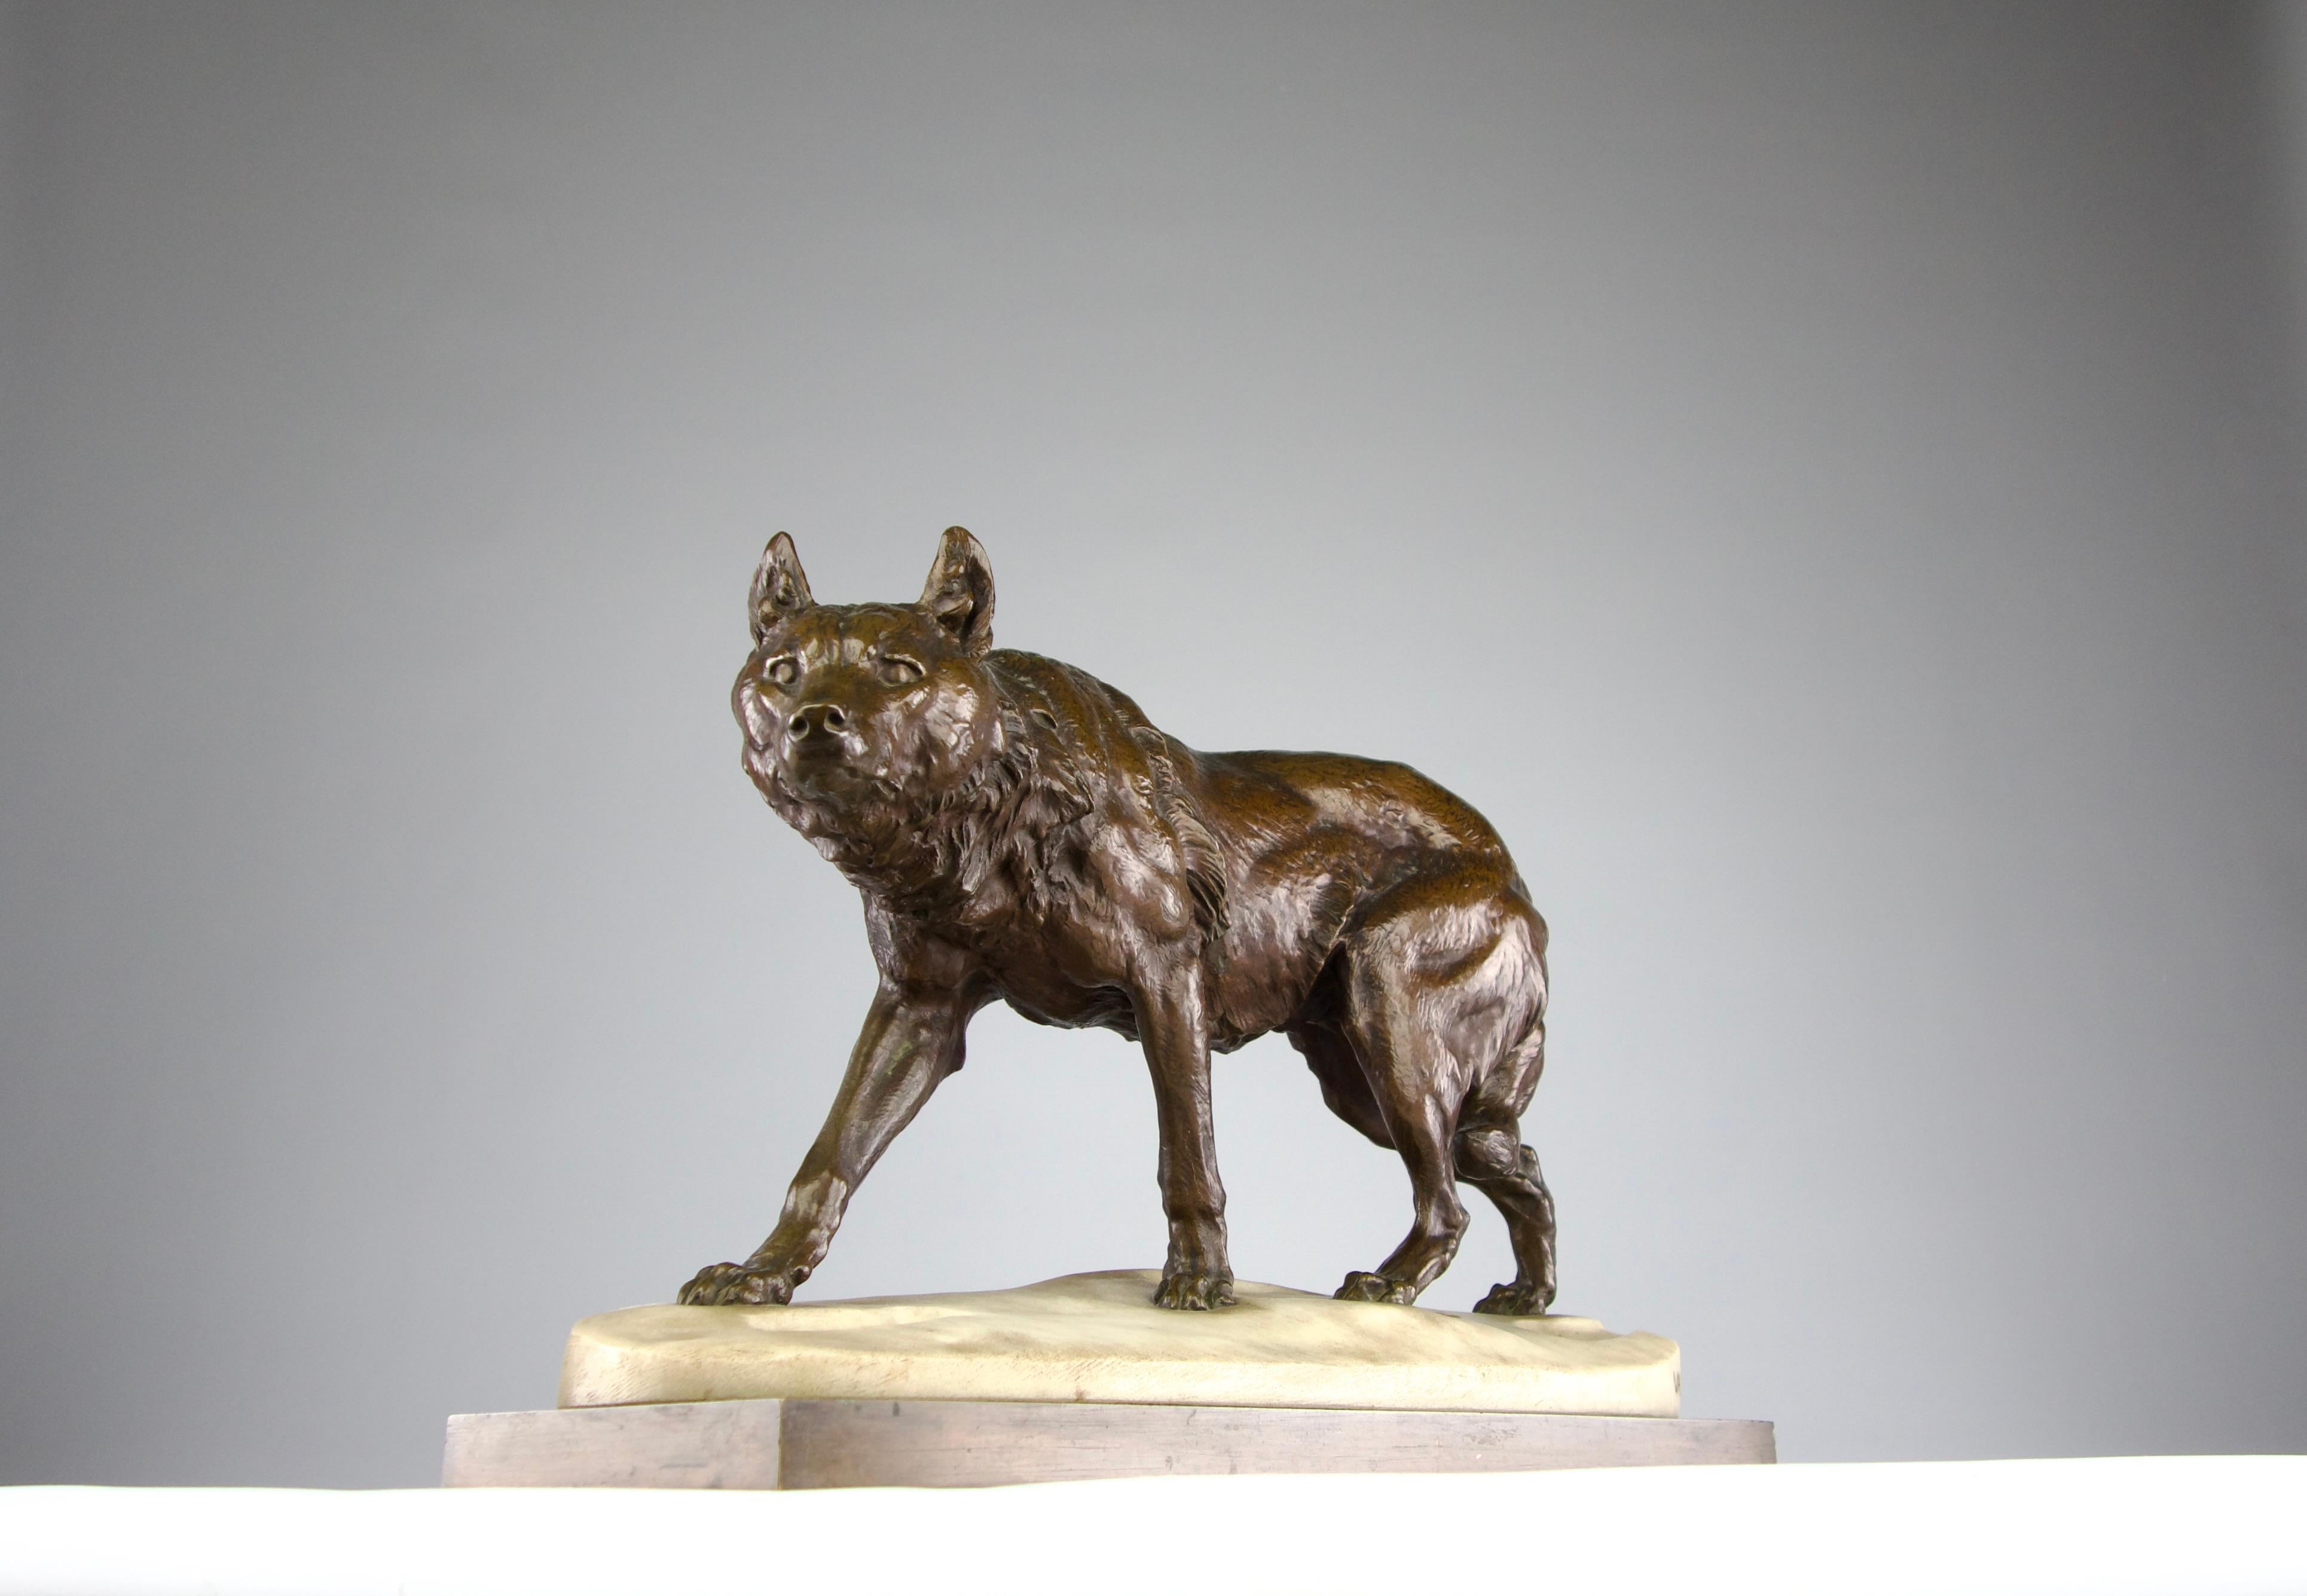 French Charles Valton, The Tracking Wolf, Romantic Period Sculpture 19th Century France For Sale